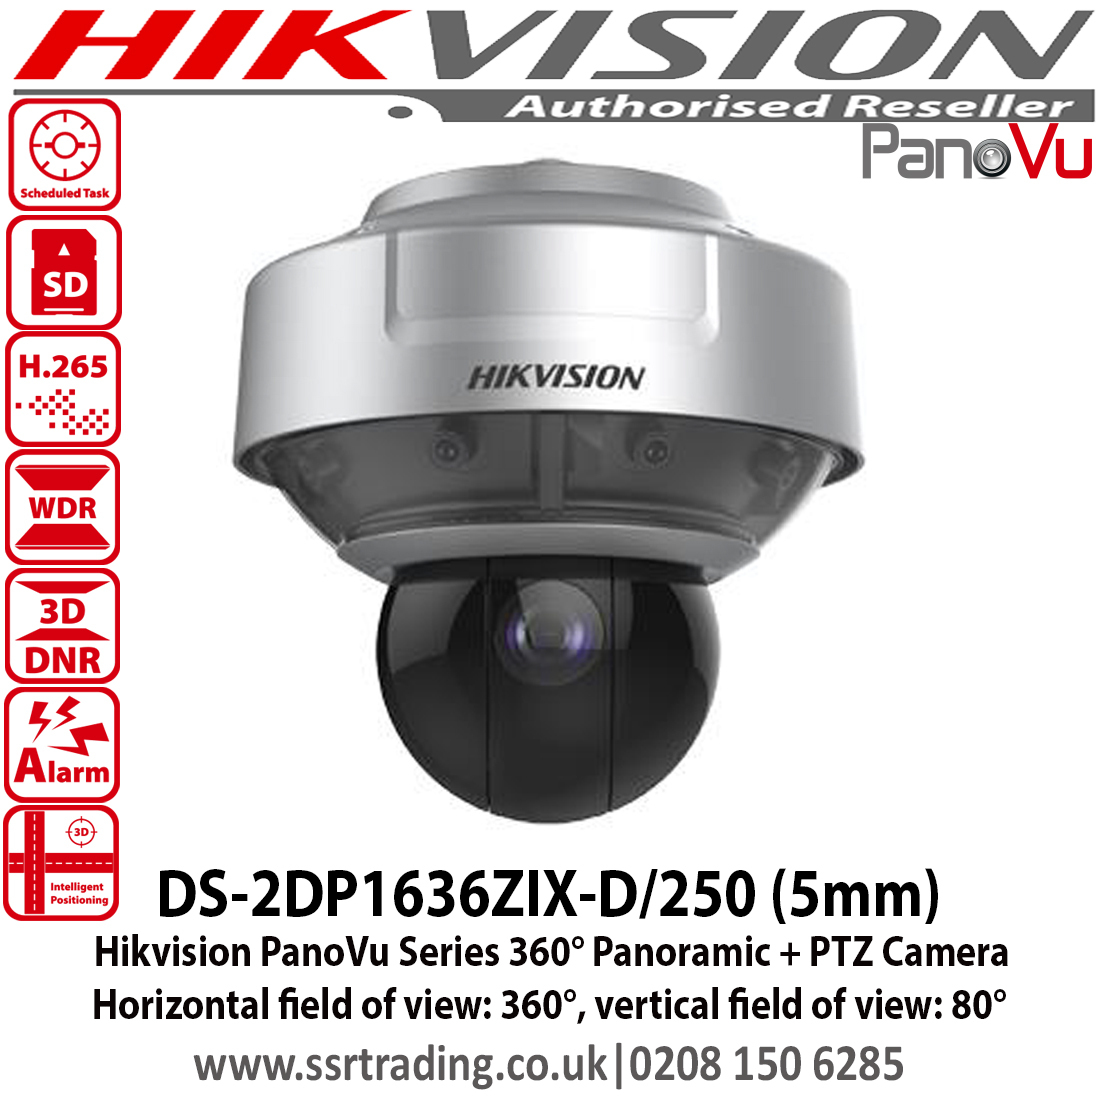 hikvision ivms 4200 client